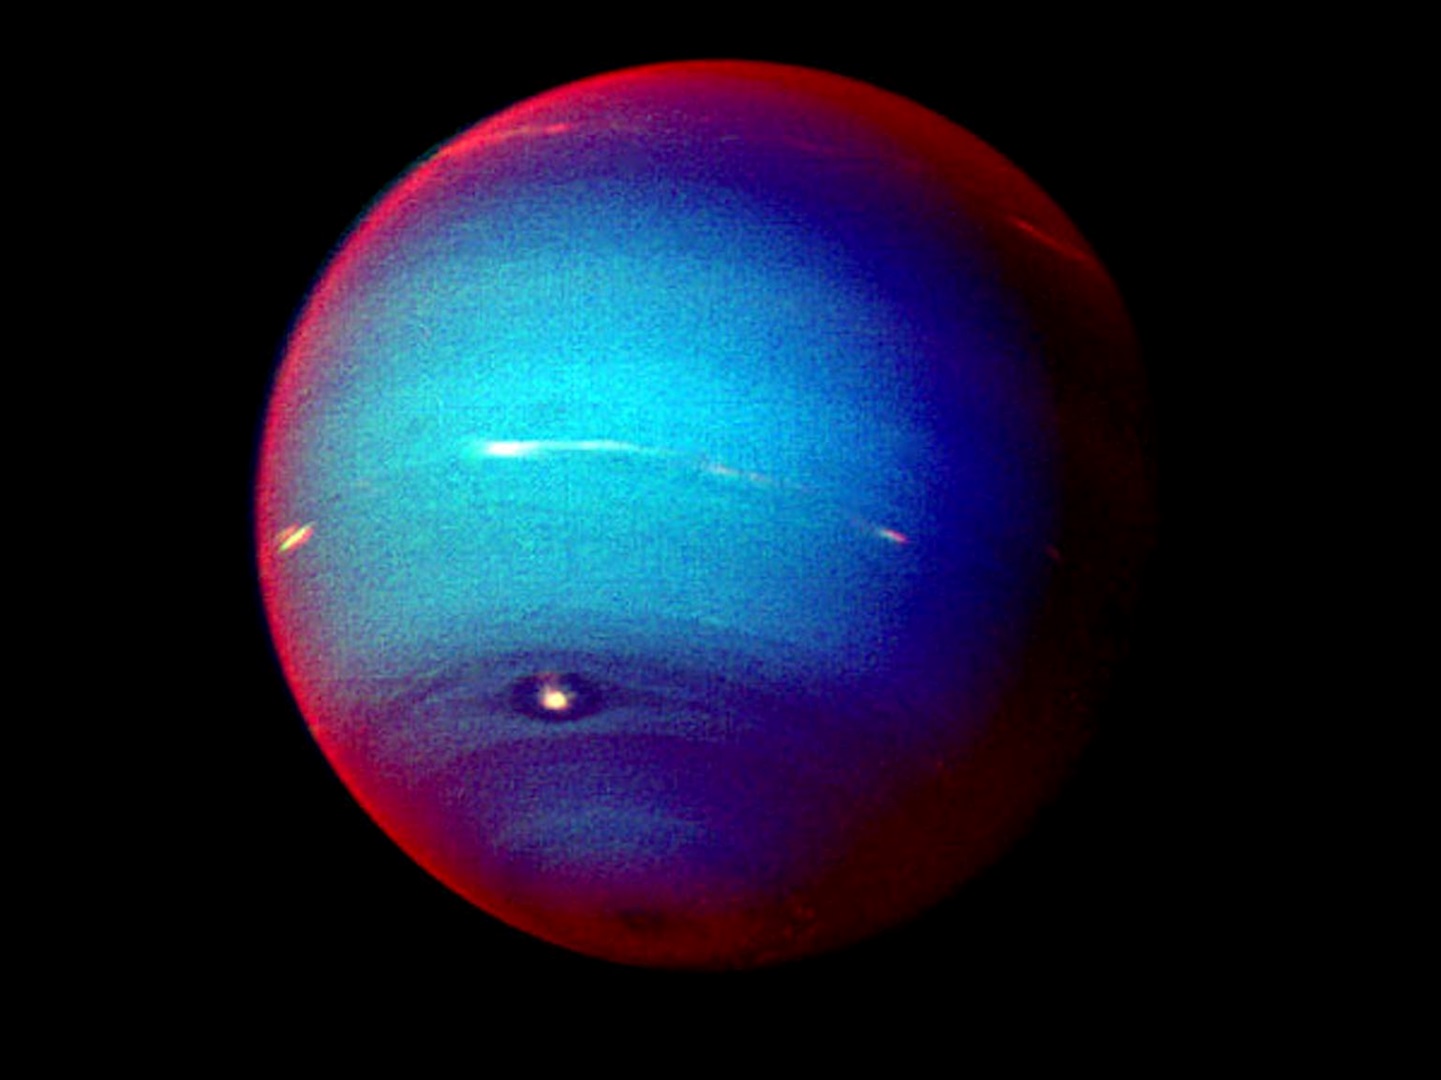 Neptune, seen in false color by Voyager 2 in 1989. Here's the red or white colour means that the sunlight is going through a methane-rich atmosphere. NASA/JPL